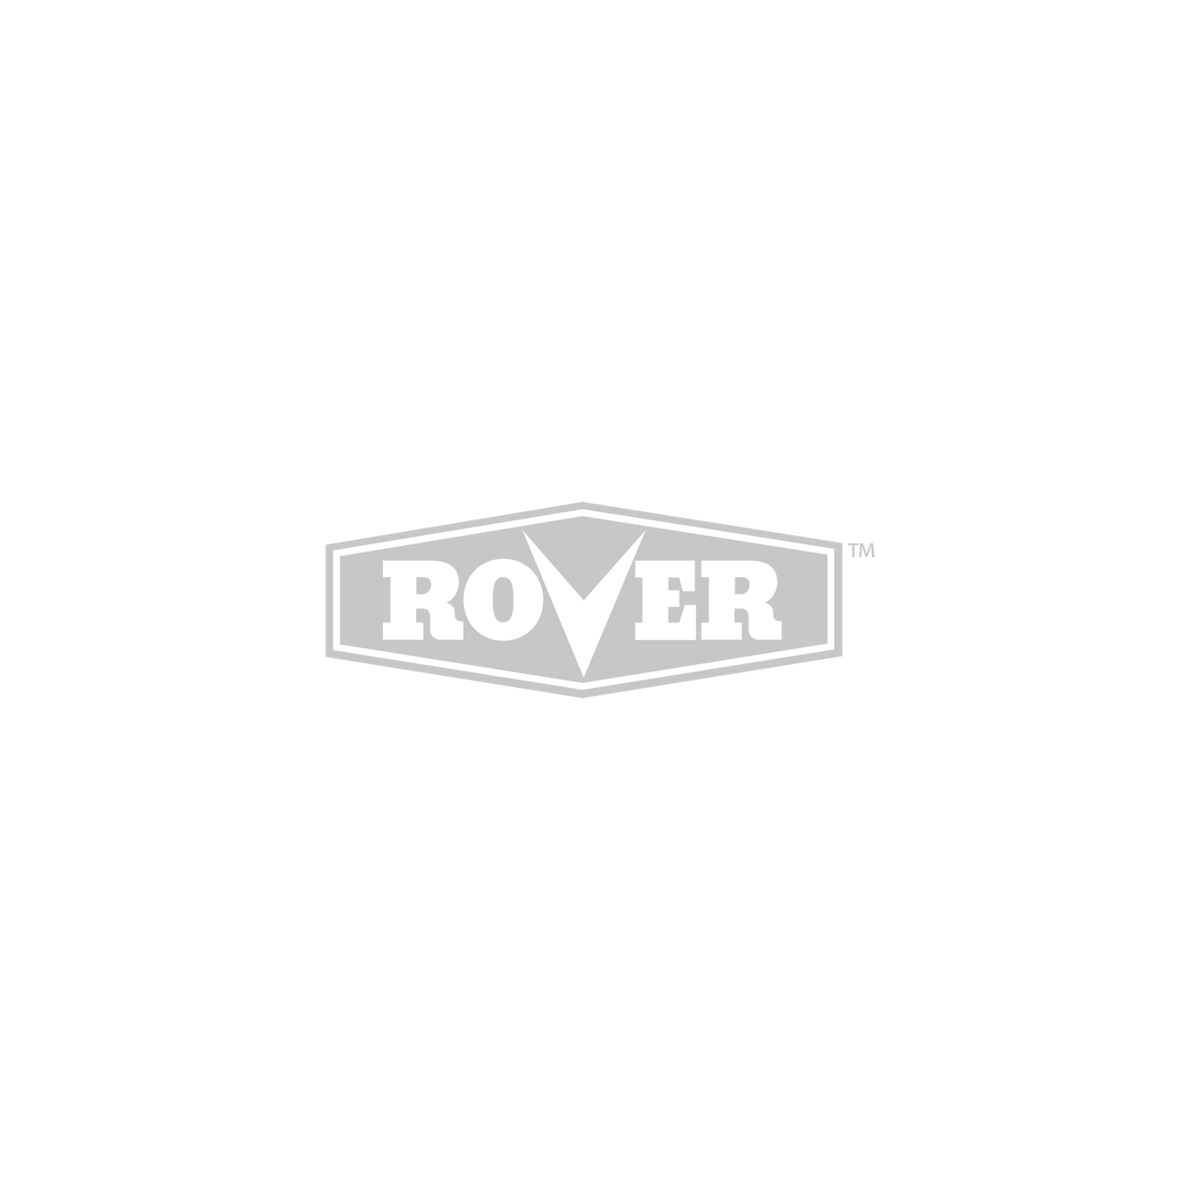 Rover Trimmers & Attachments